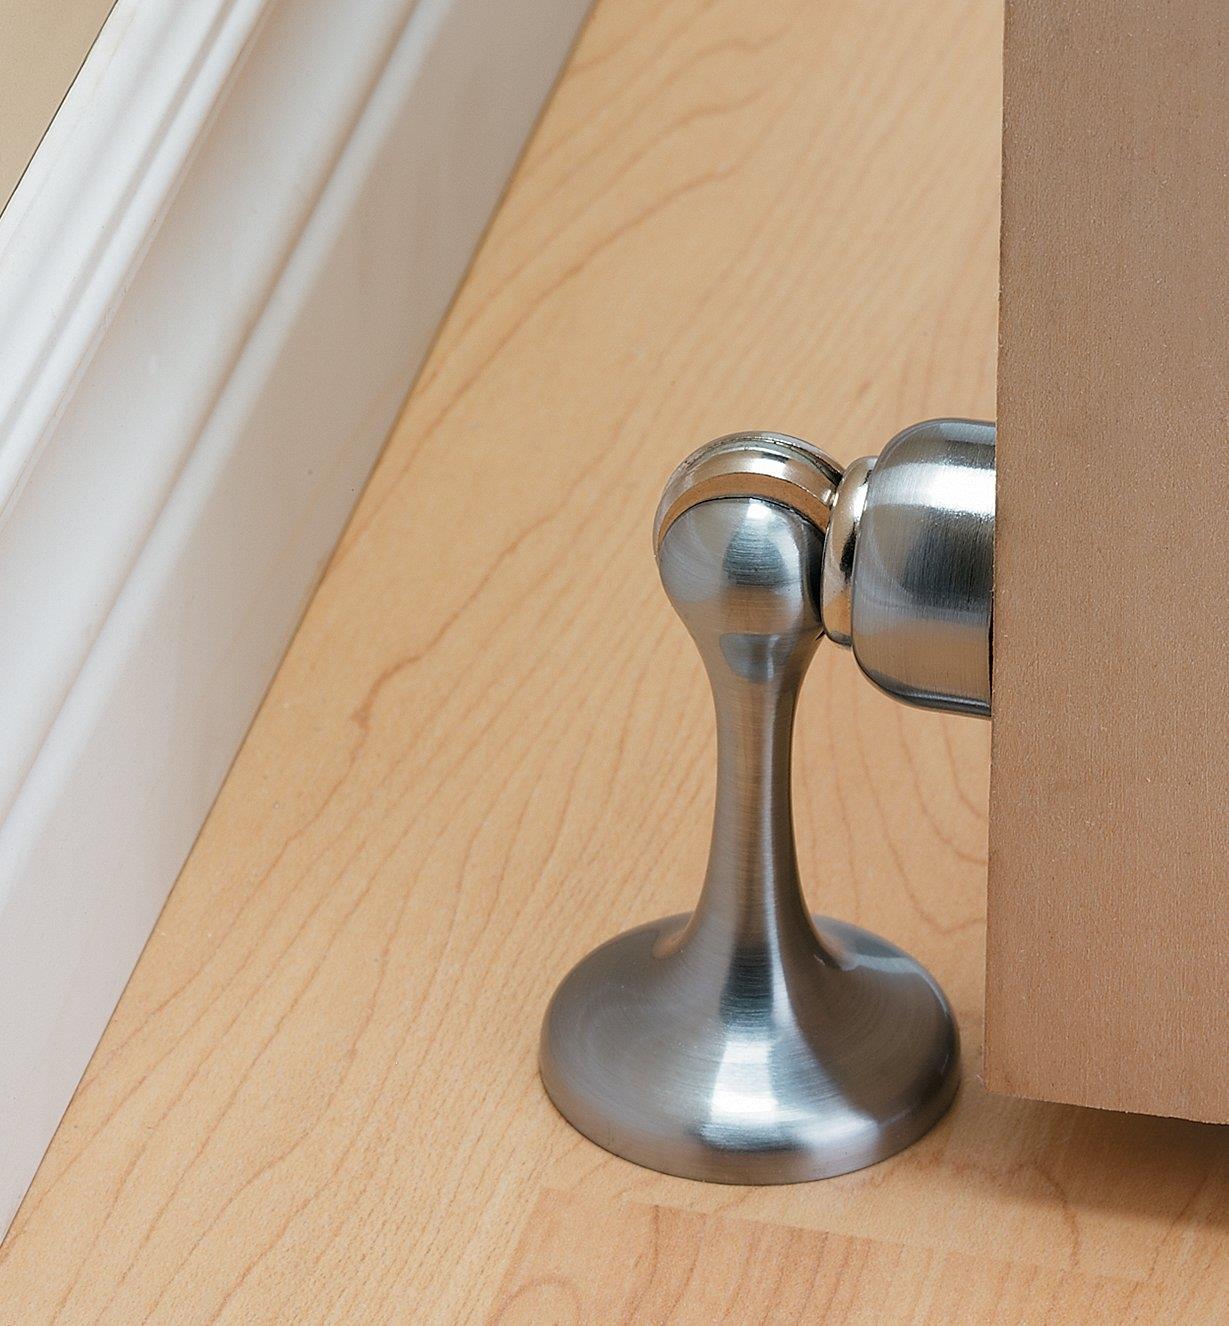 How to Install a Wall Door Stop